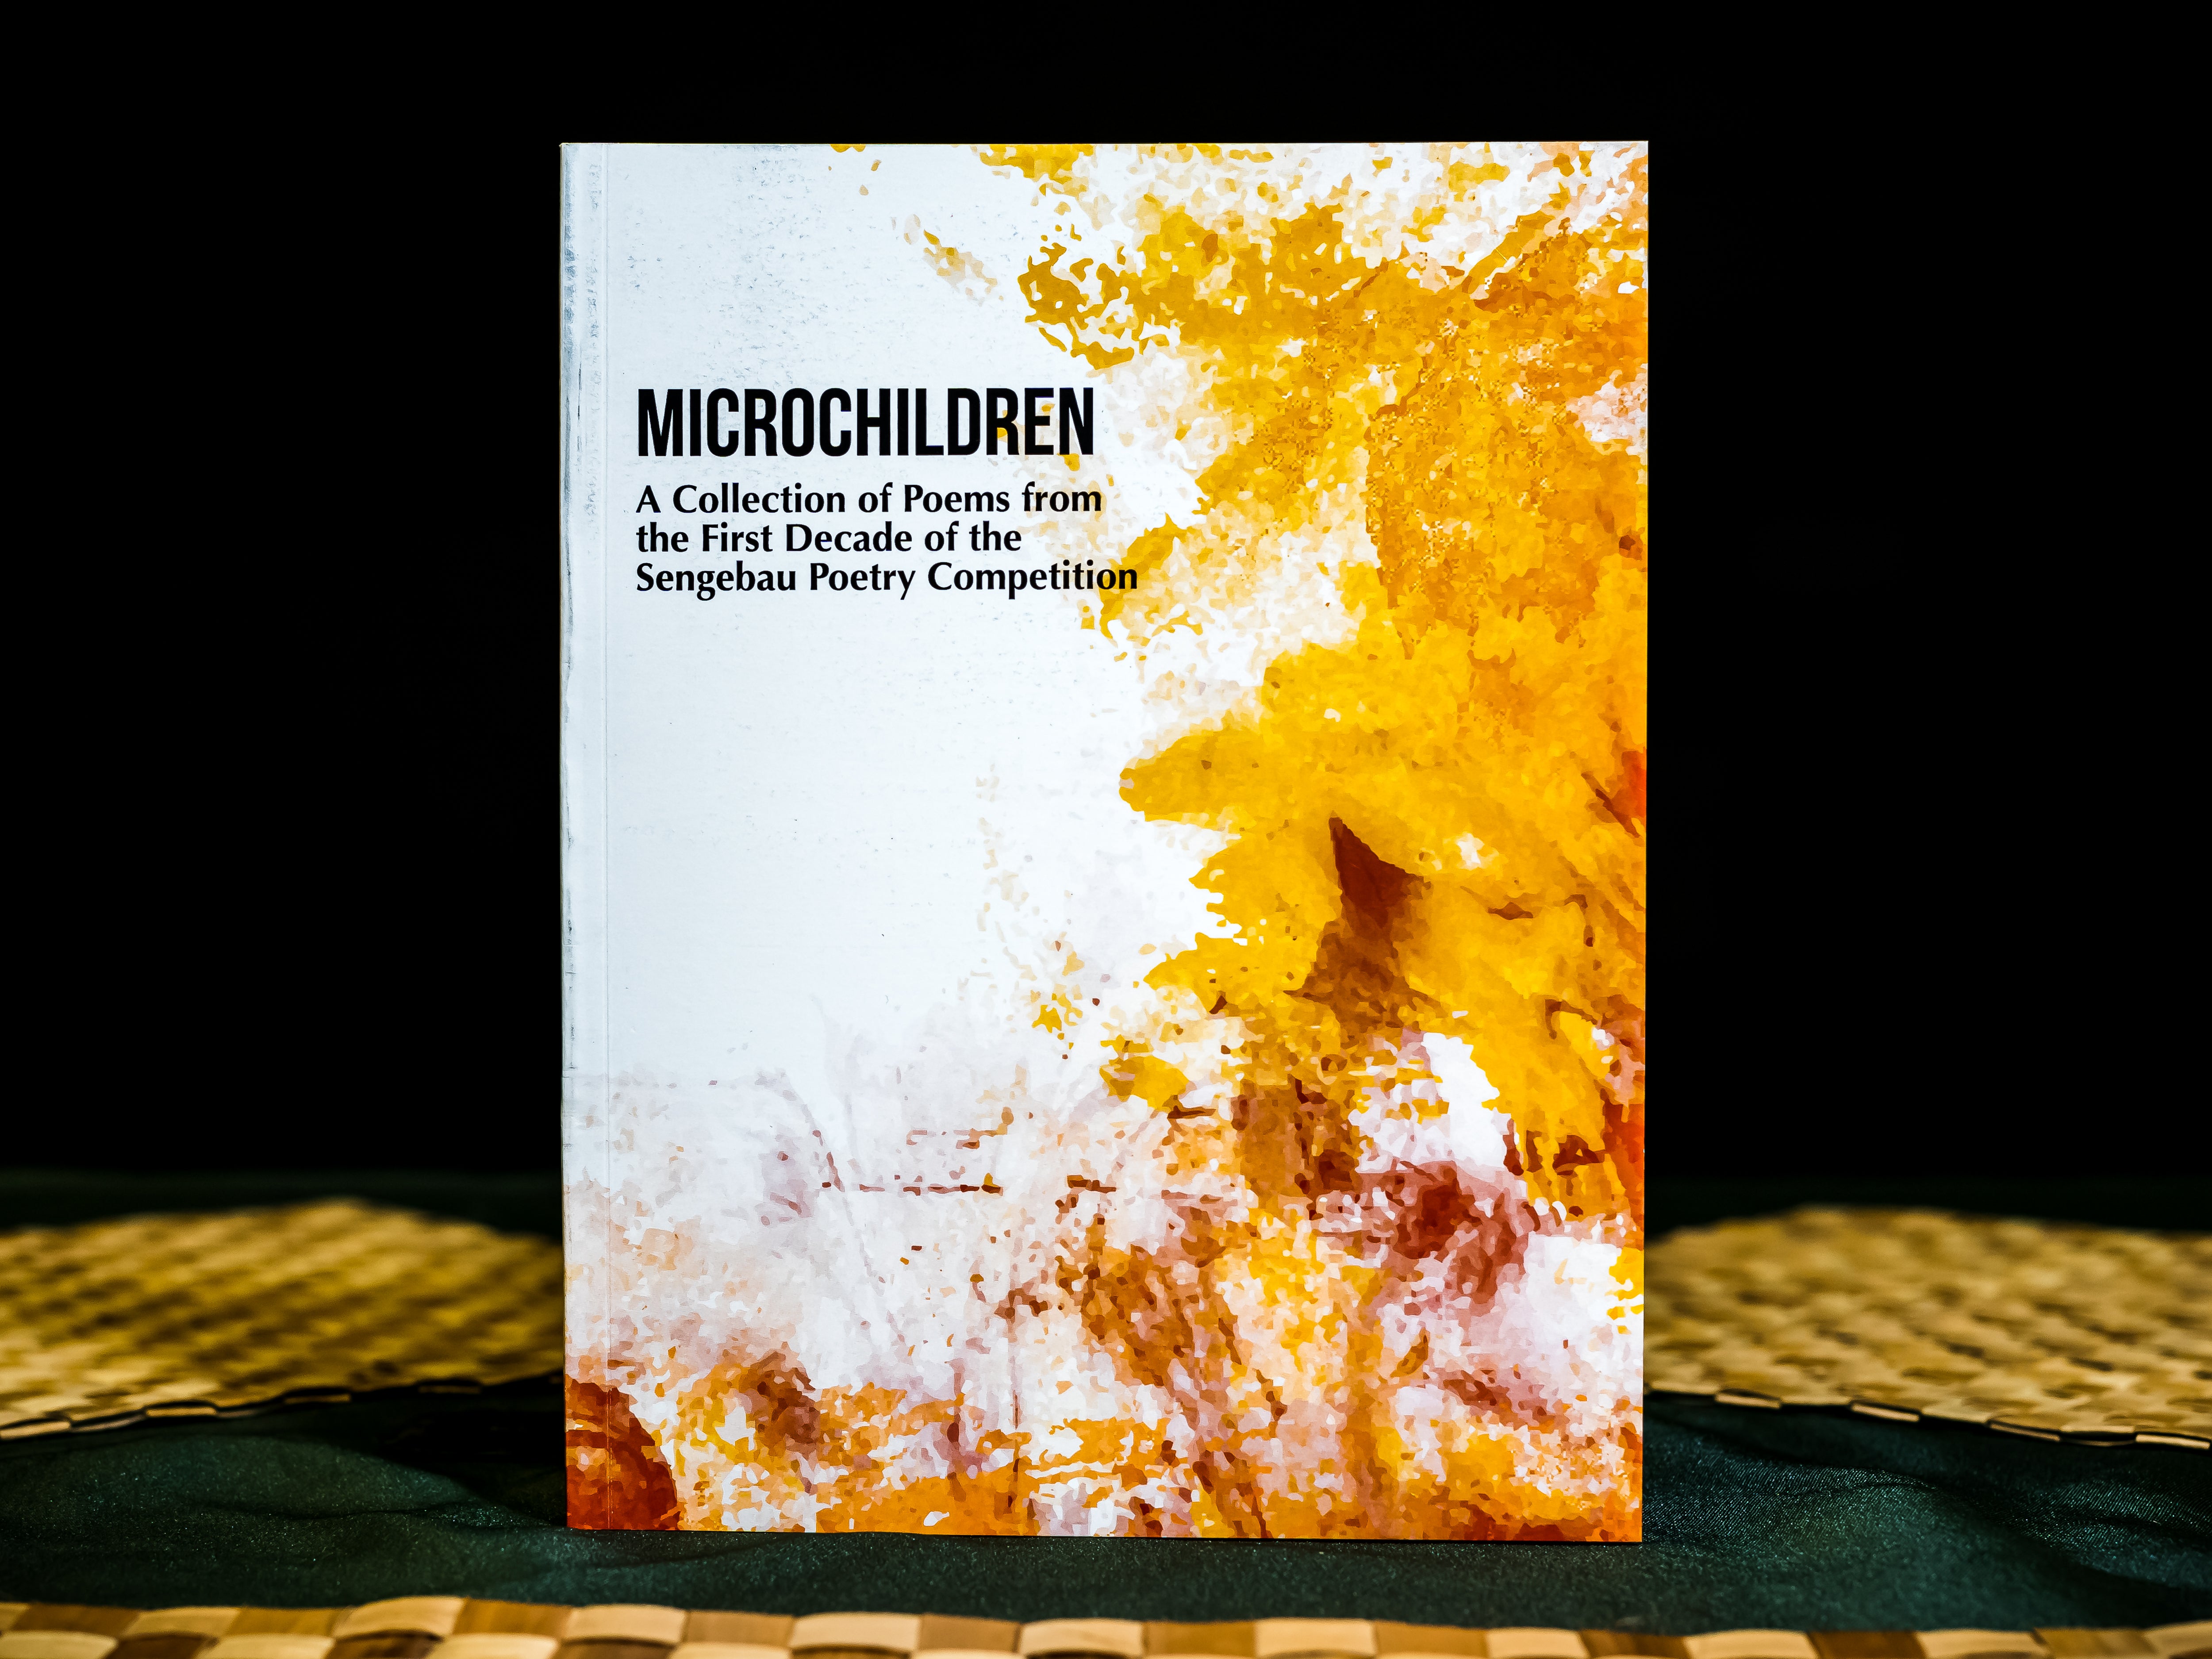 Microchildren: A Collection of Poems from the First Decade of the Sengebau Poetry Competition